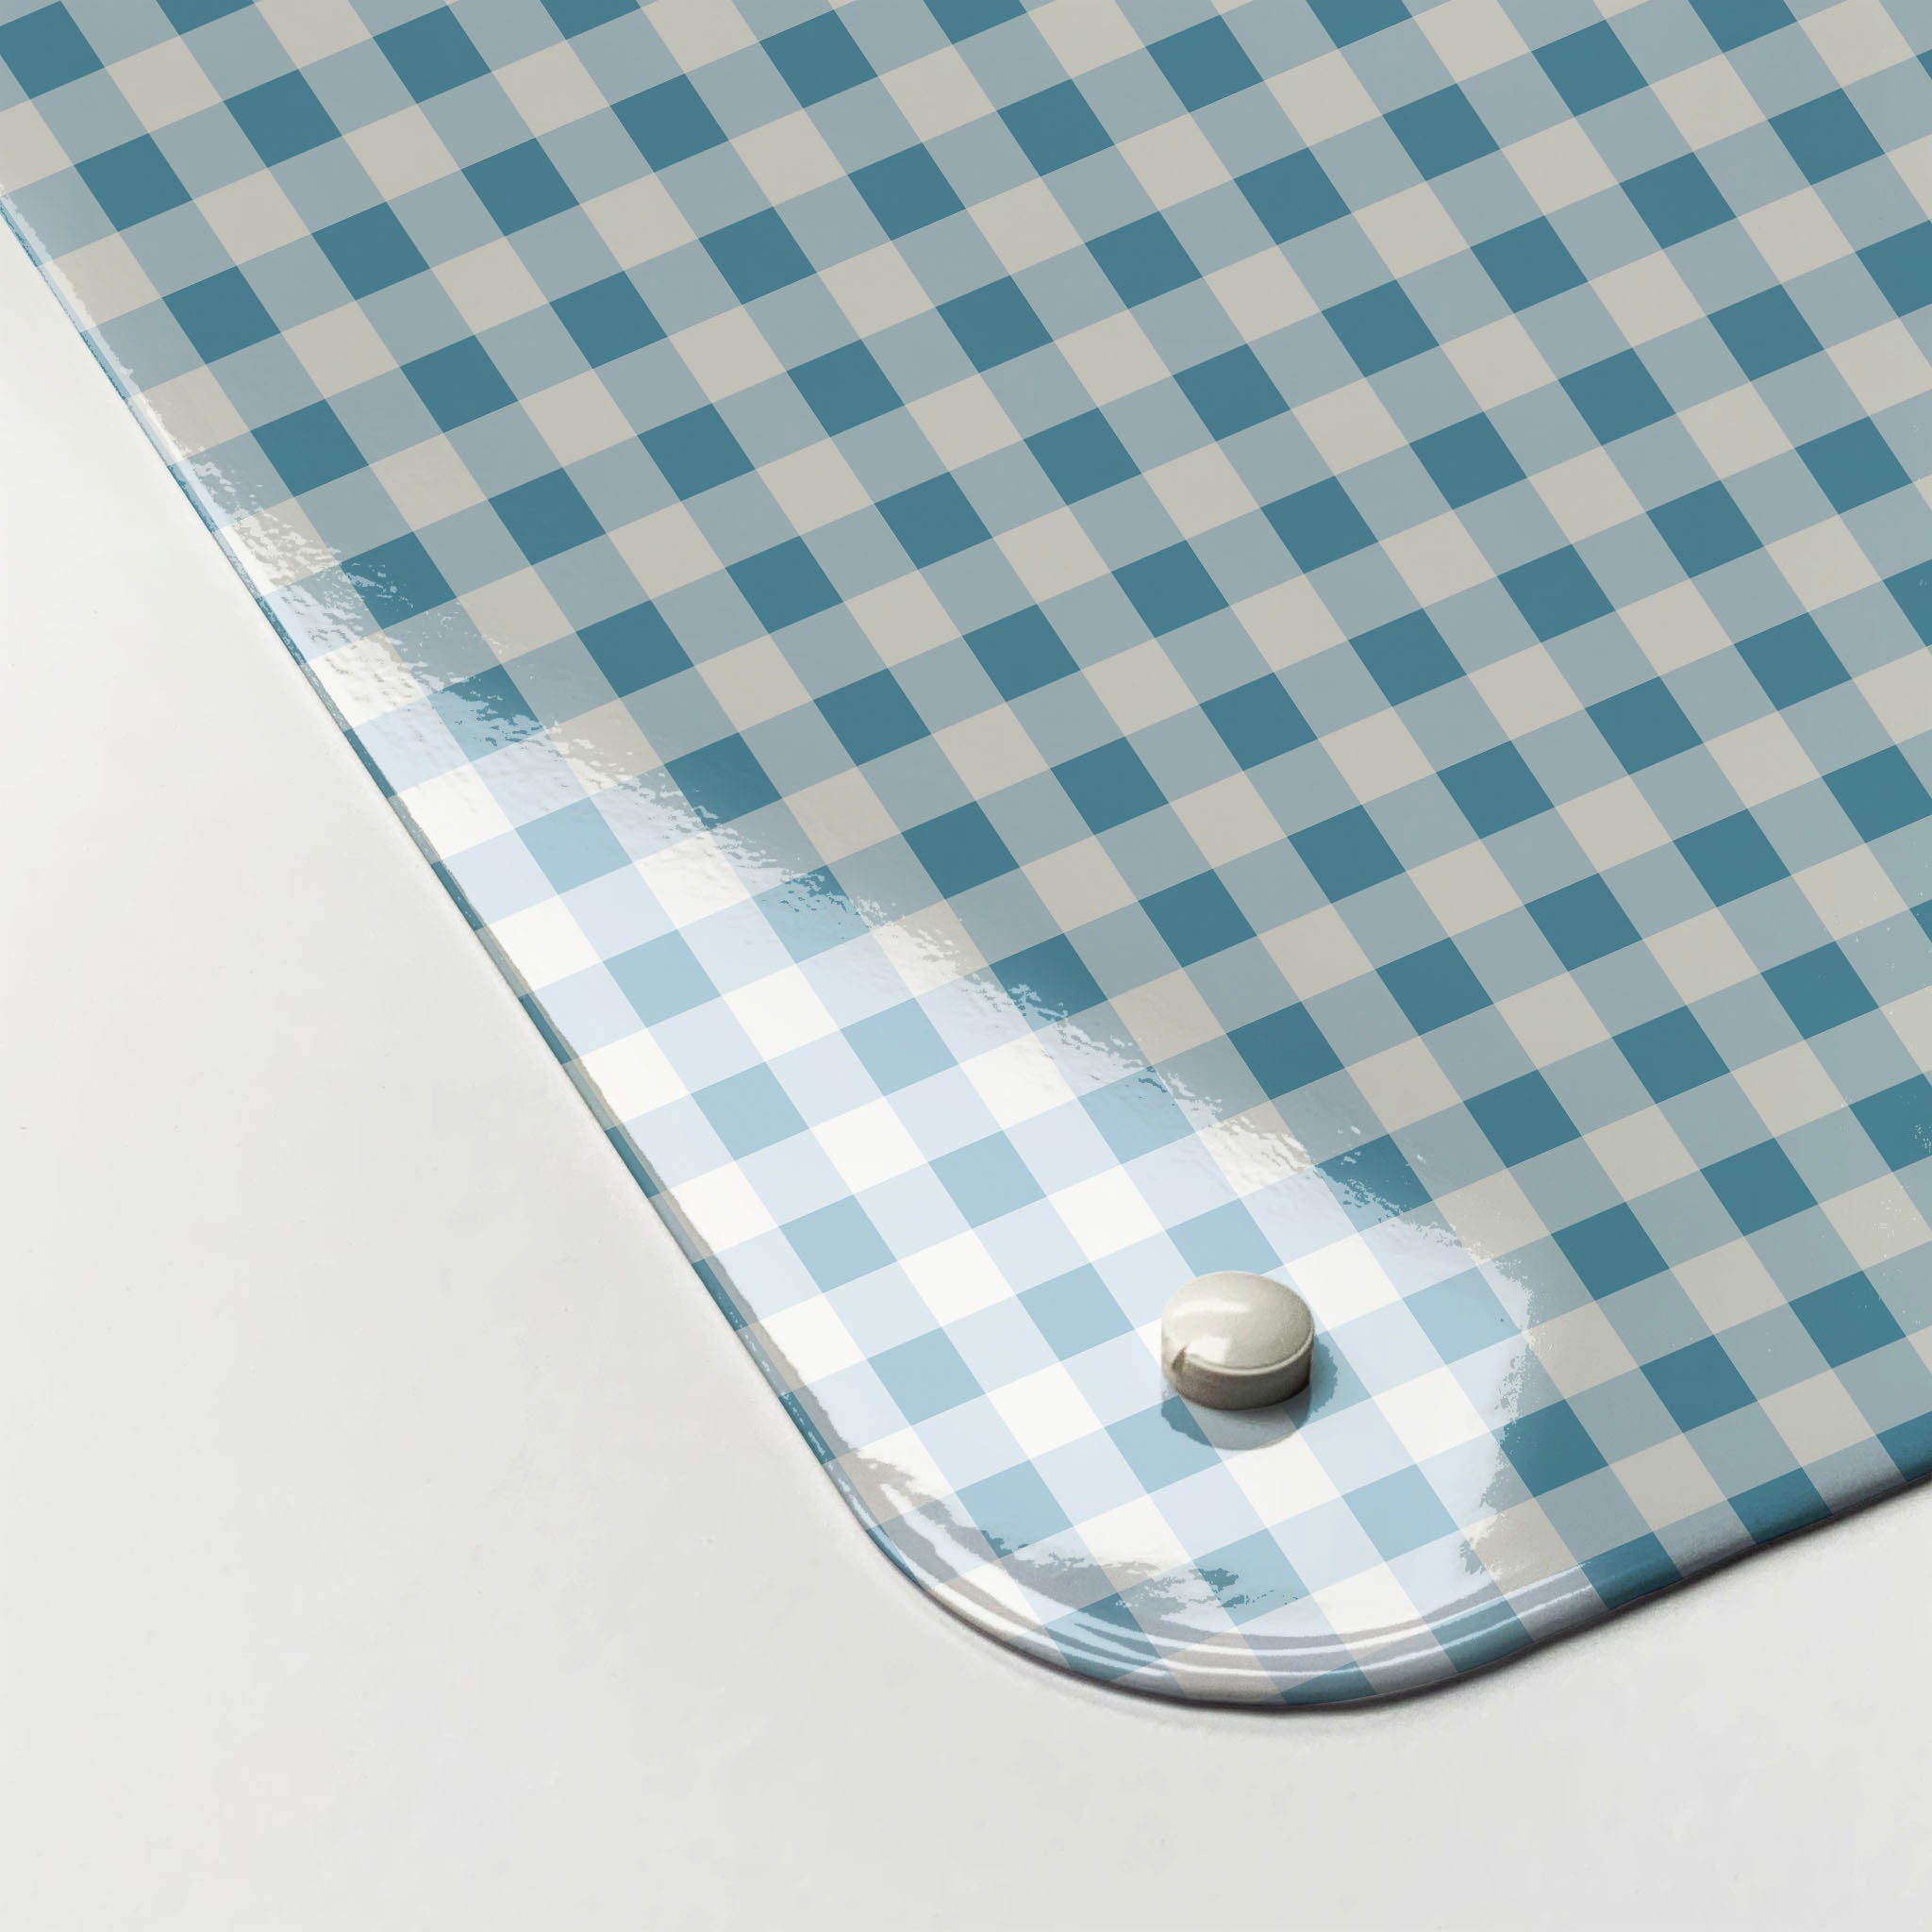 The corner detail of a blue gingham design magnetic board to show it’s high gloss surface